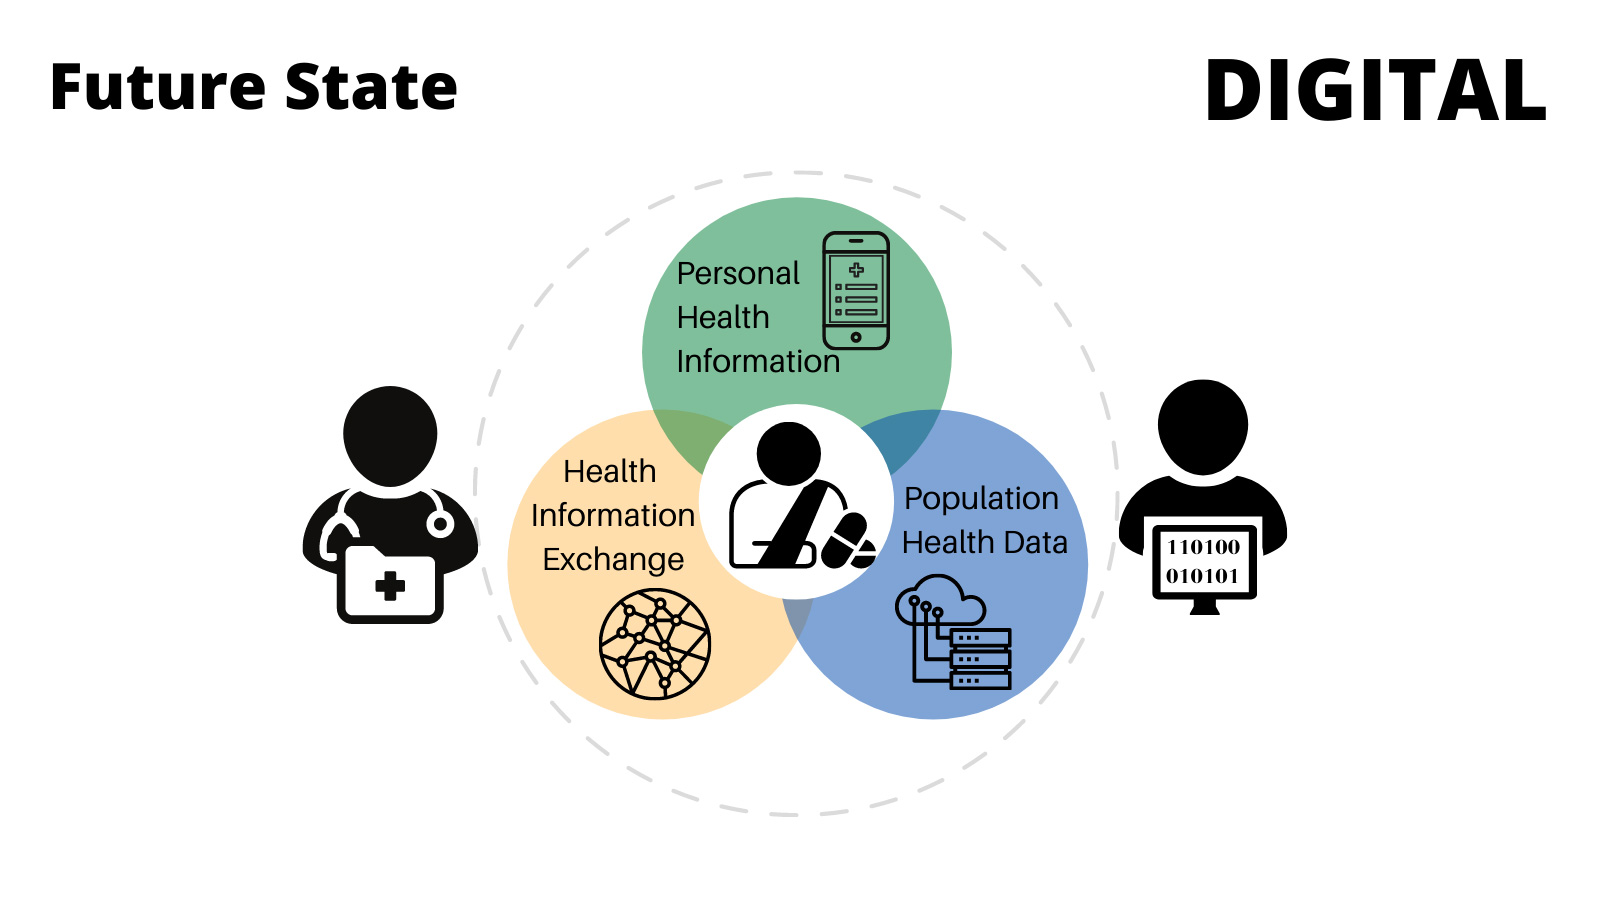 Figure 3c. Future: Person-centred data provides the right data to the right people at the right time by design.